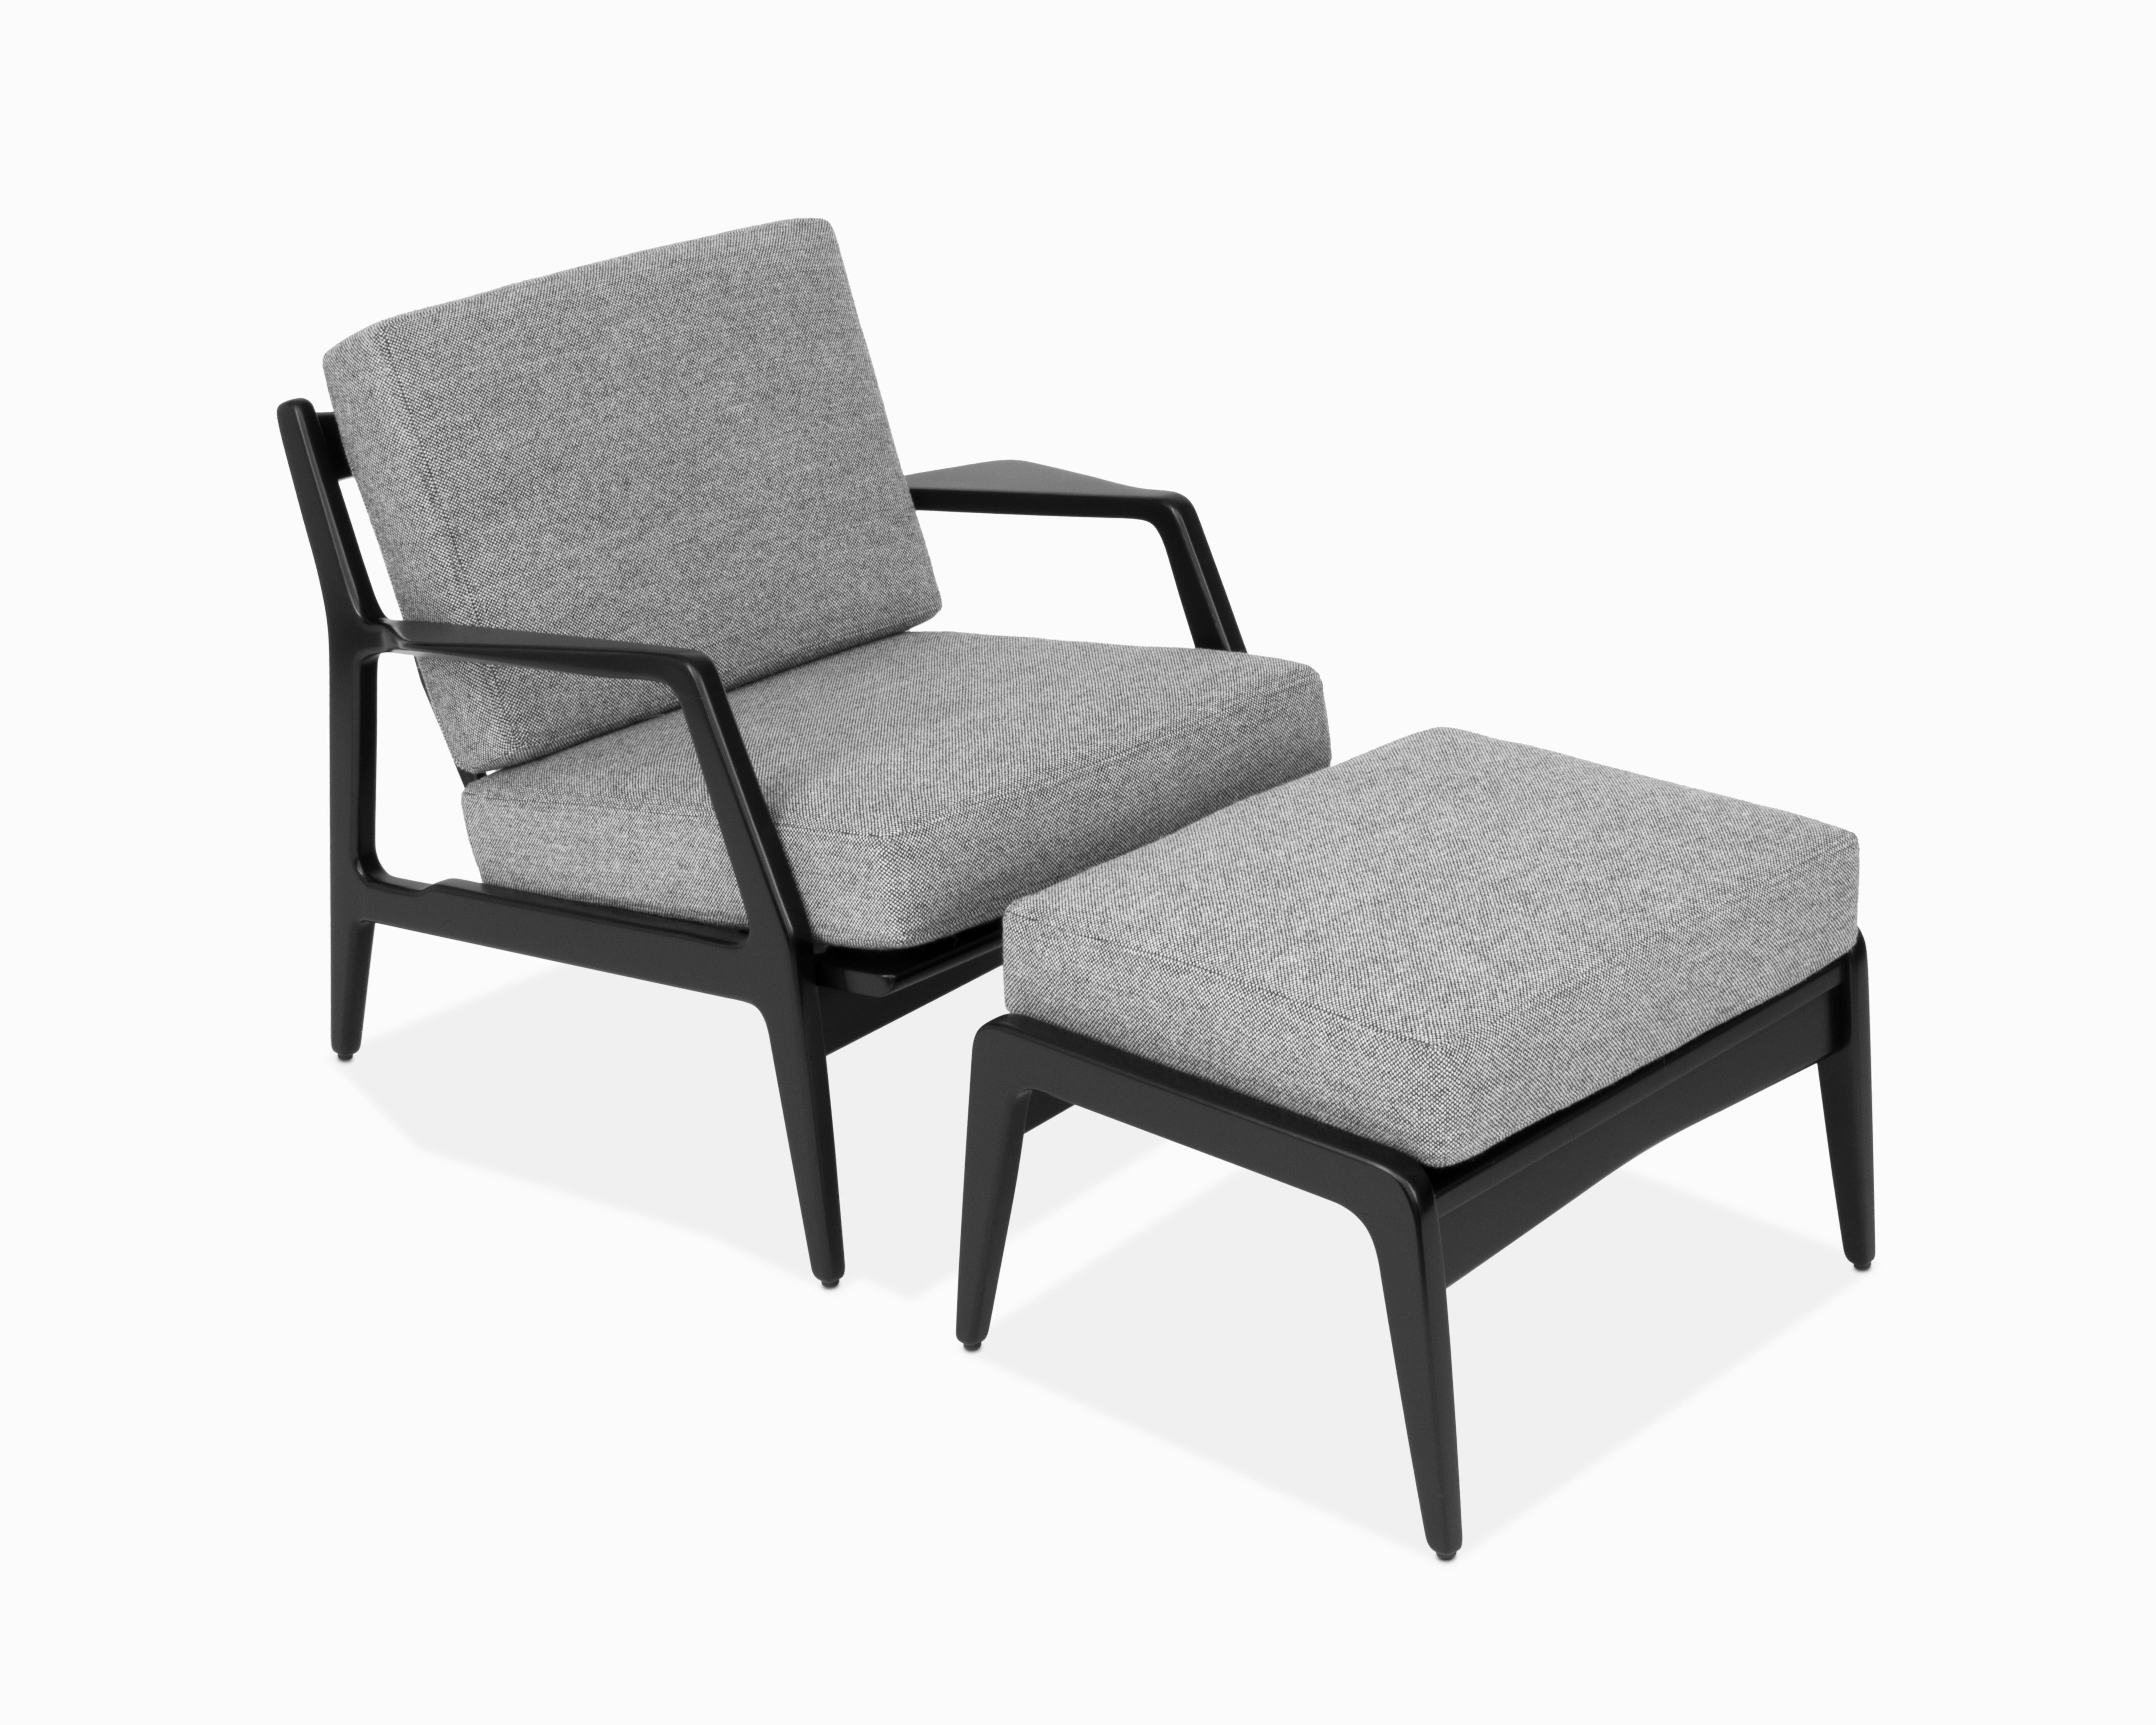 Here is a beautiful mid century lounge chair and ottoman by Lawrence Peabody for Selig. This item has been completely restored with refinished black lacquer frame, new wool upholstery and rubber webbing. The angular design is quite eye catching as